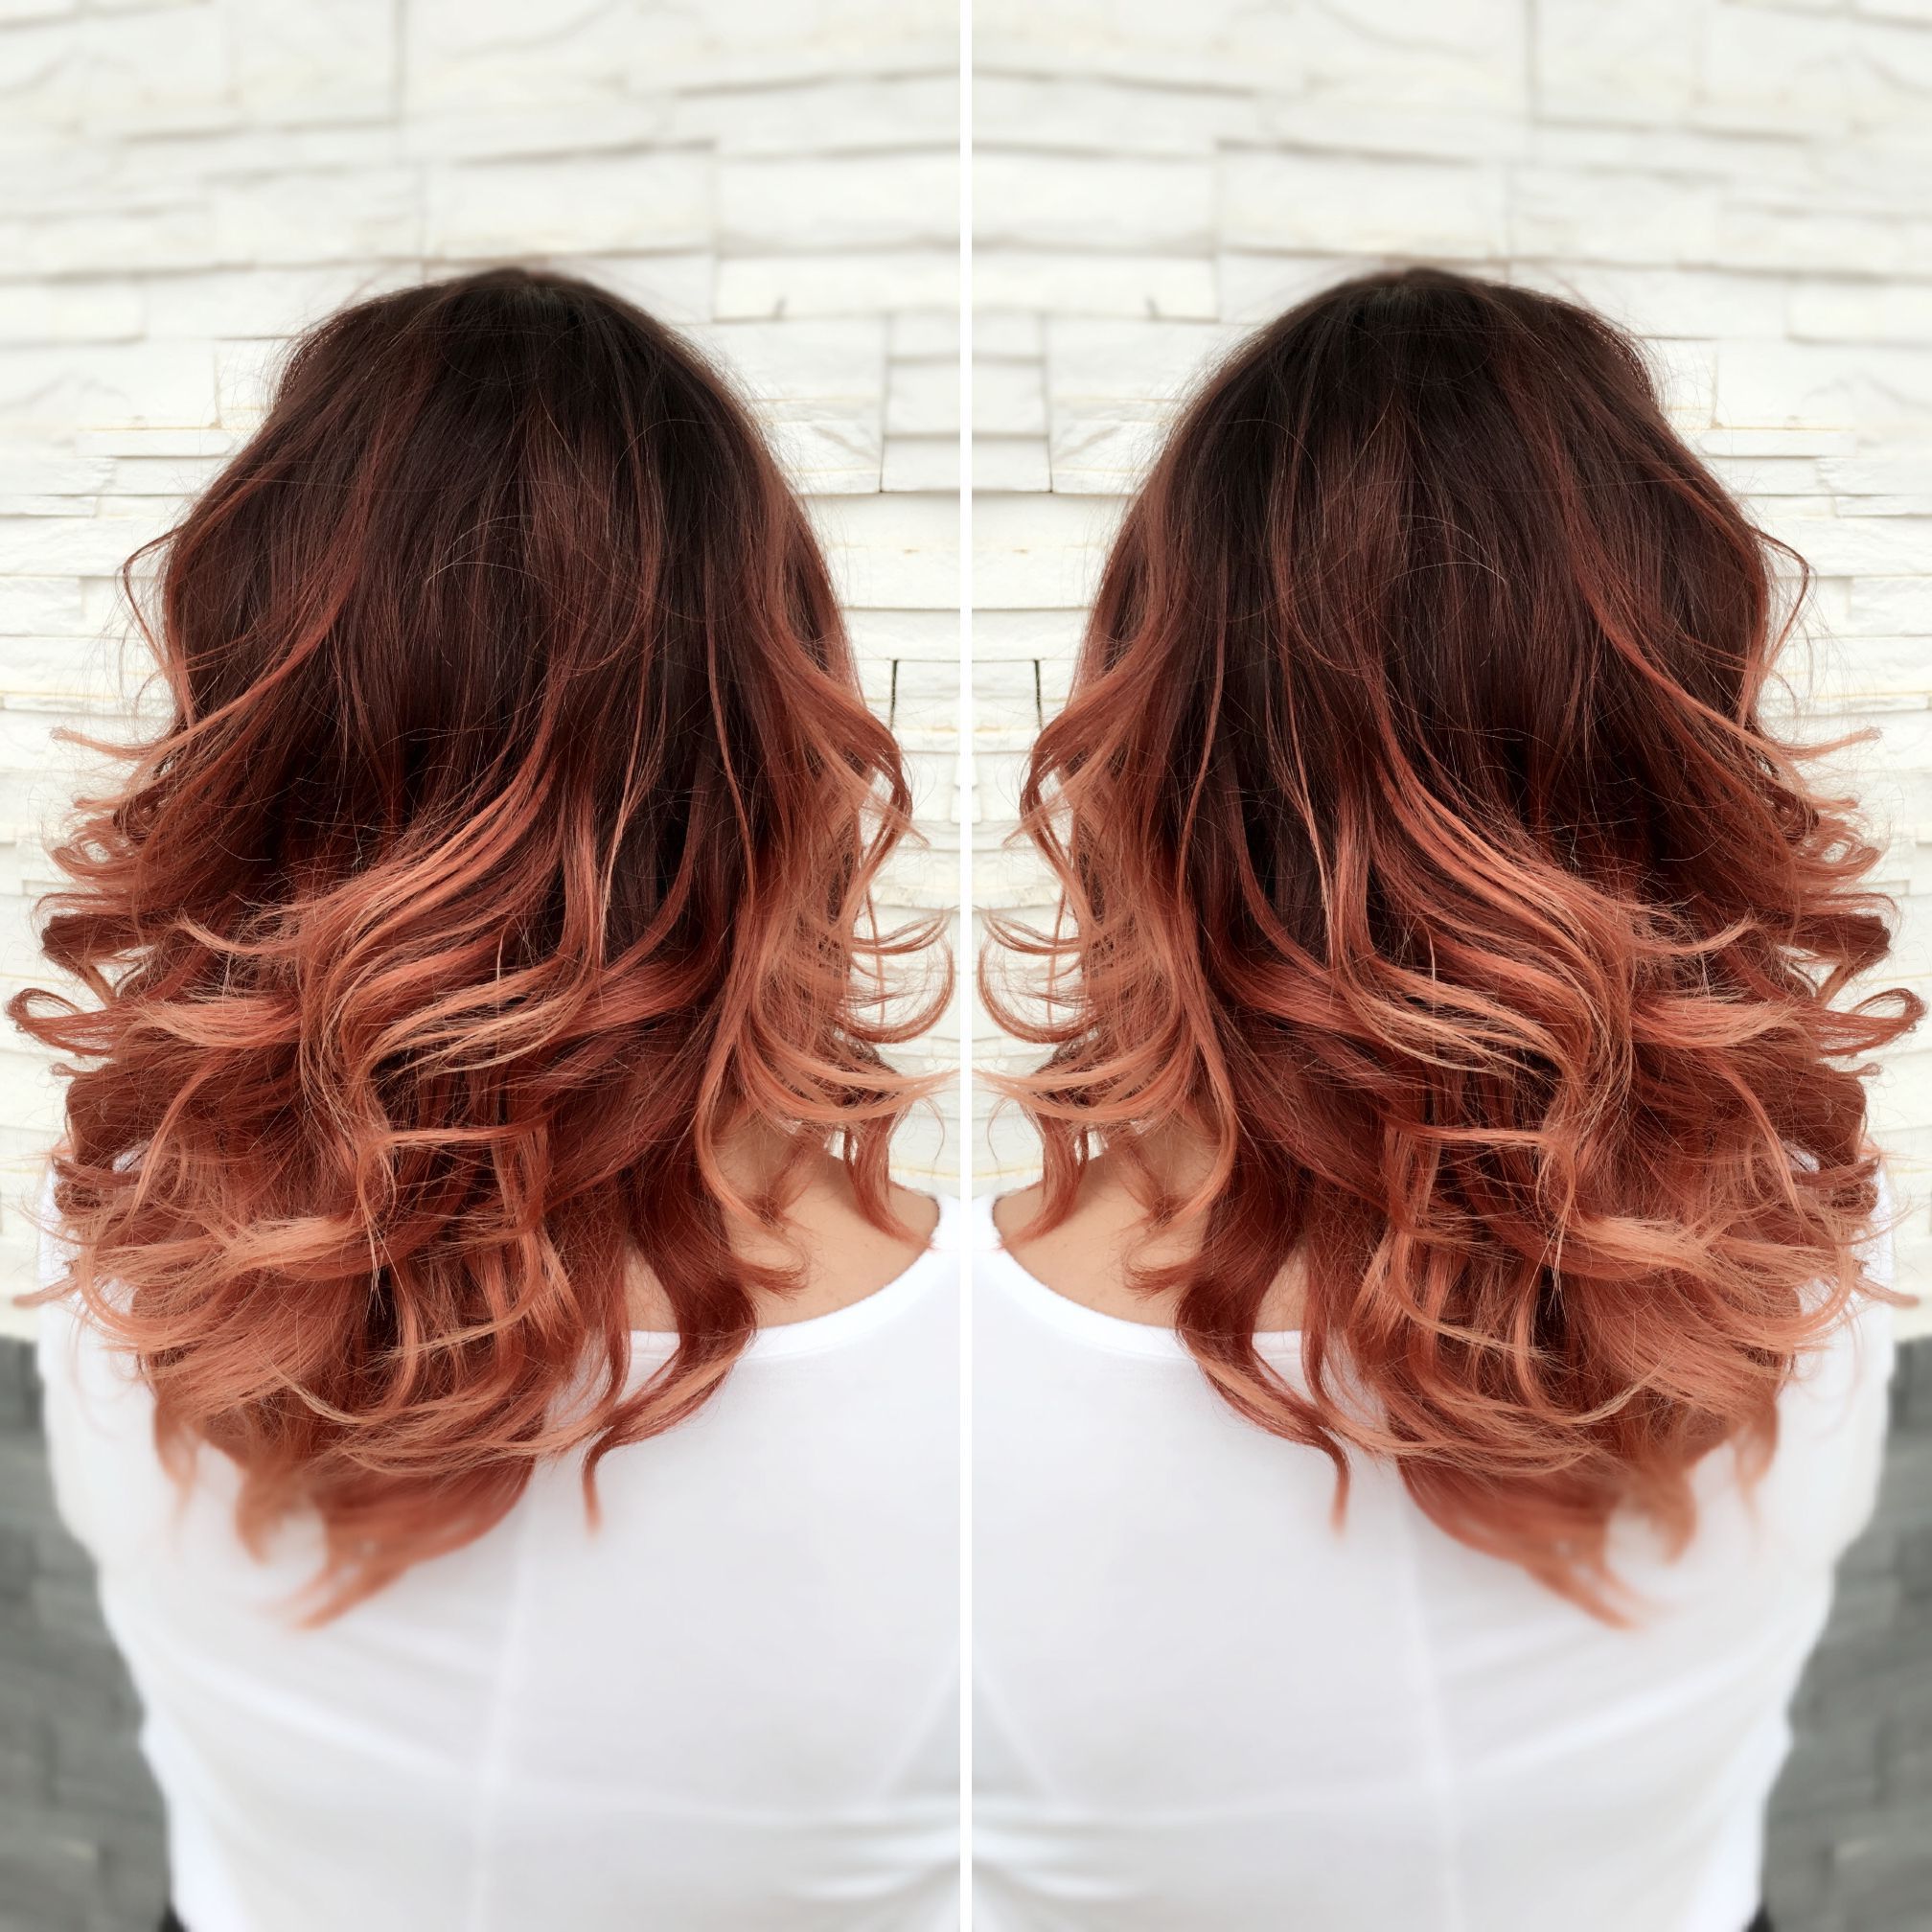 This Is What I Want But With Lighter Red At The Roots Pertaining To Dimensional Dark Roots To Red Ends Balayage Hairstyles (View 11 of 20)